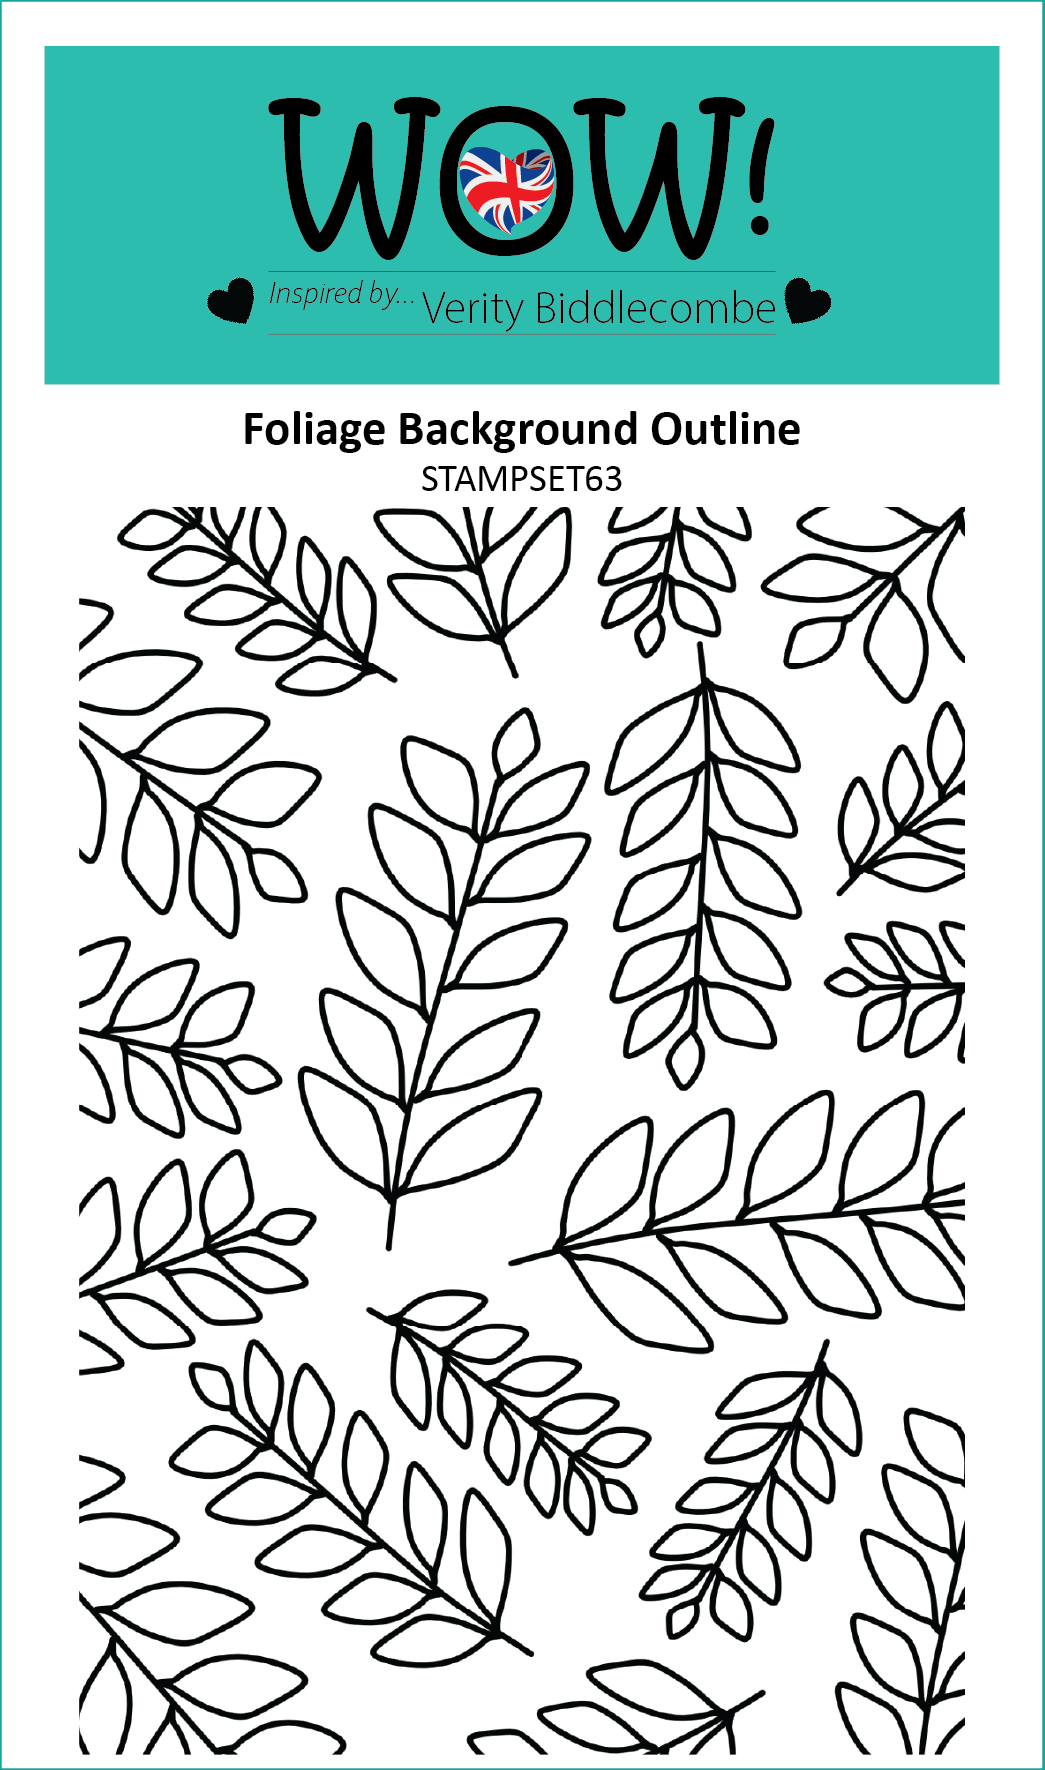 Set de sellos Wow Stamp (A6) - Foliage Bkgrd Outline (byVerityBiddlecombe)